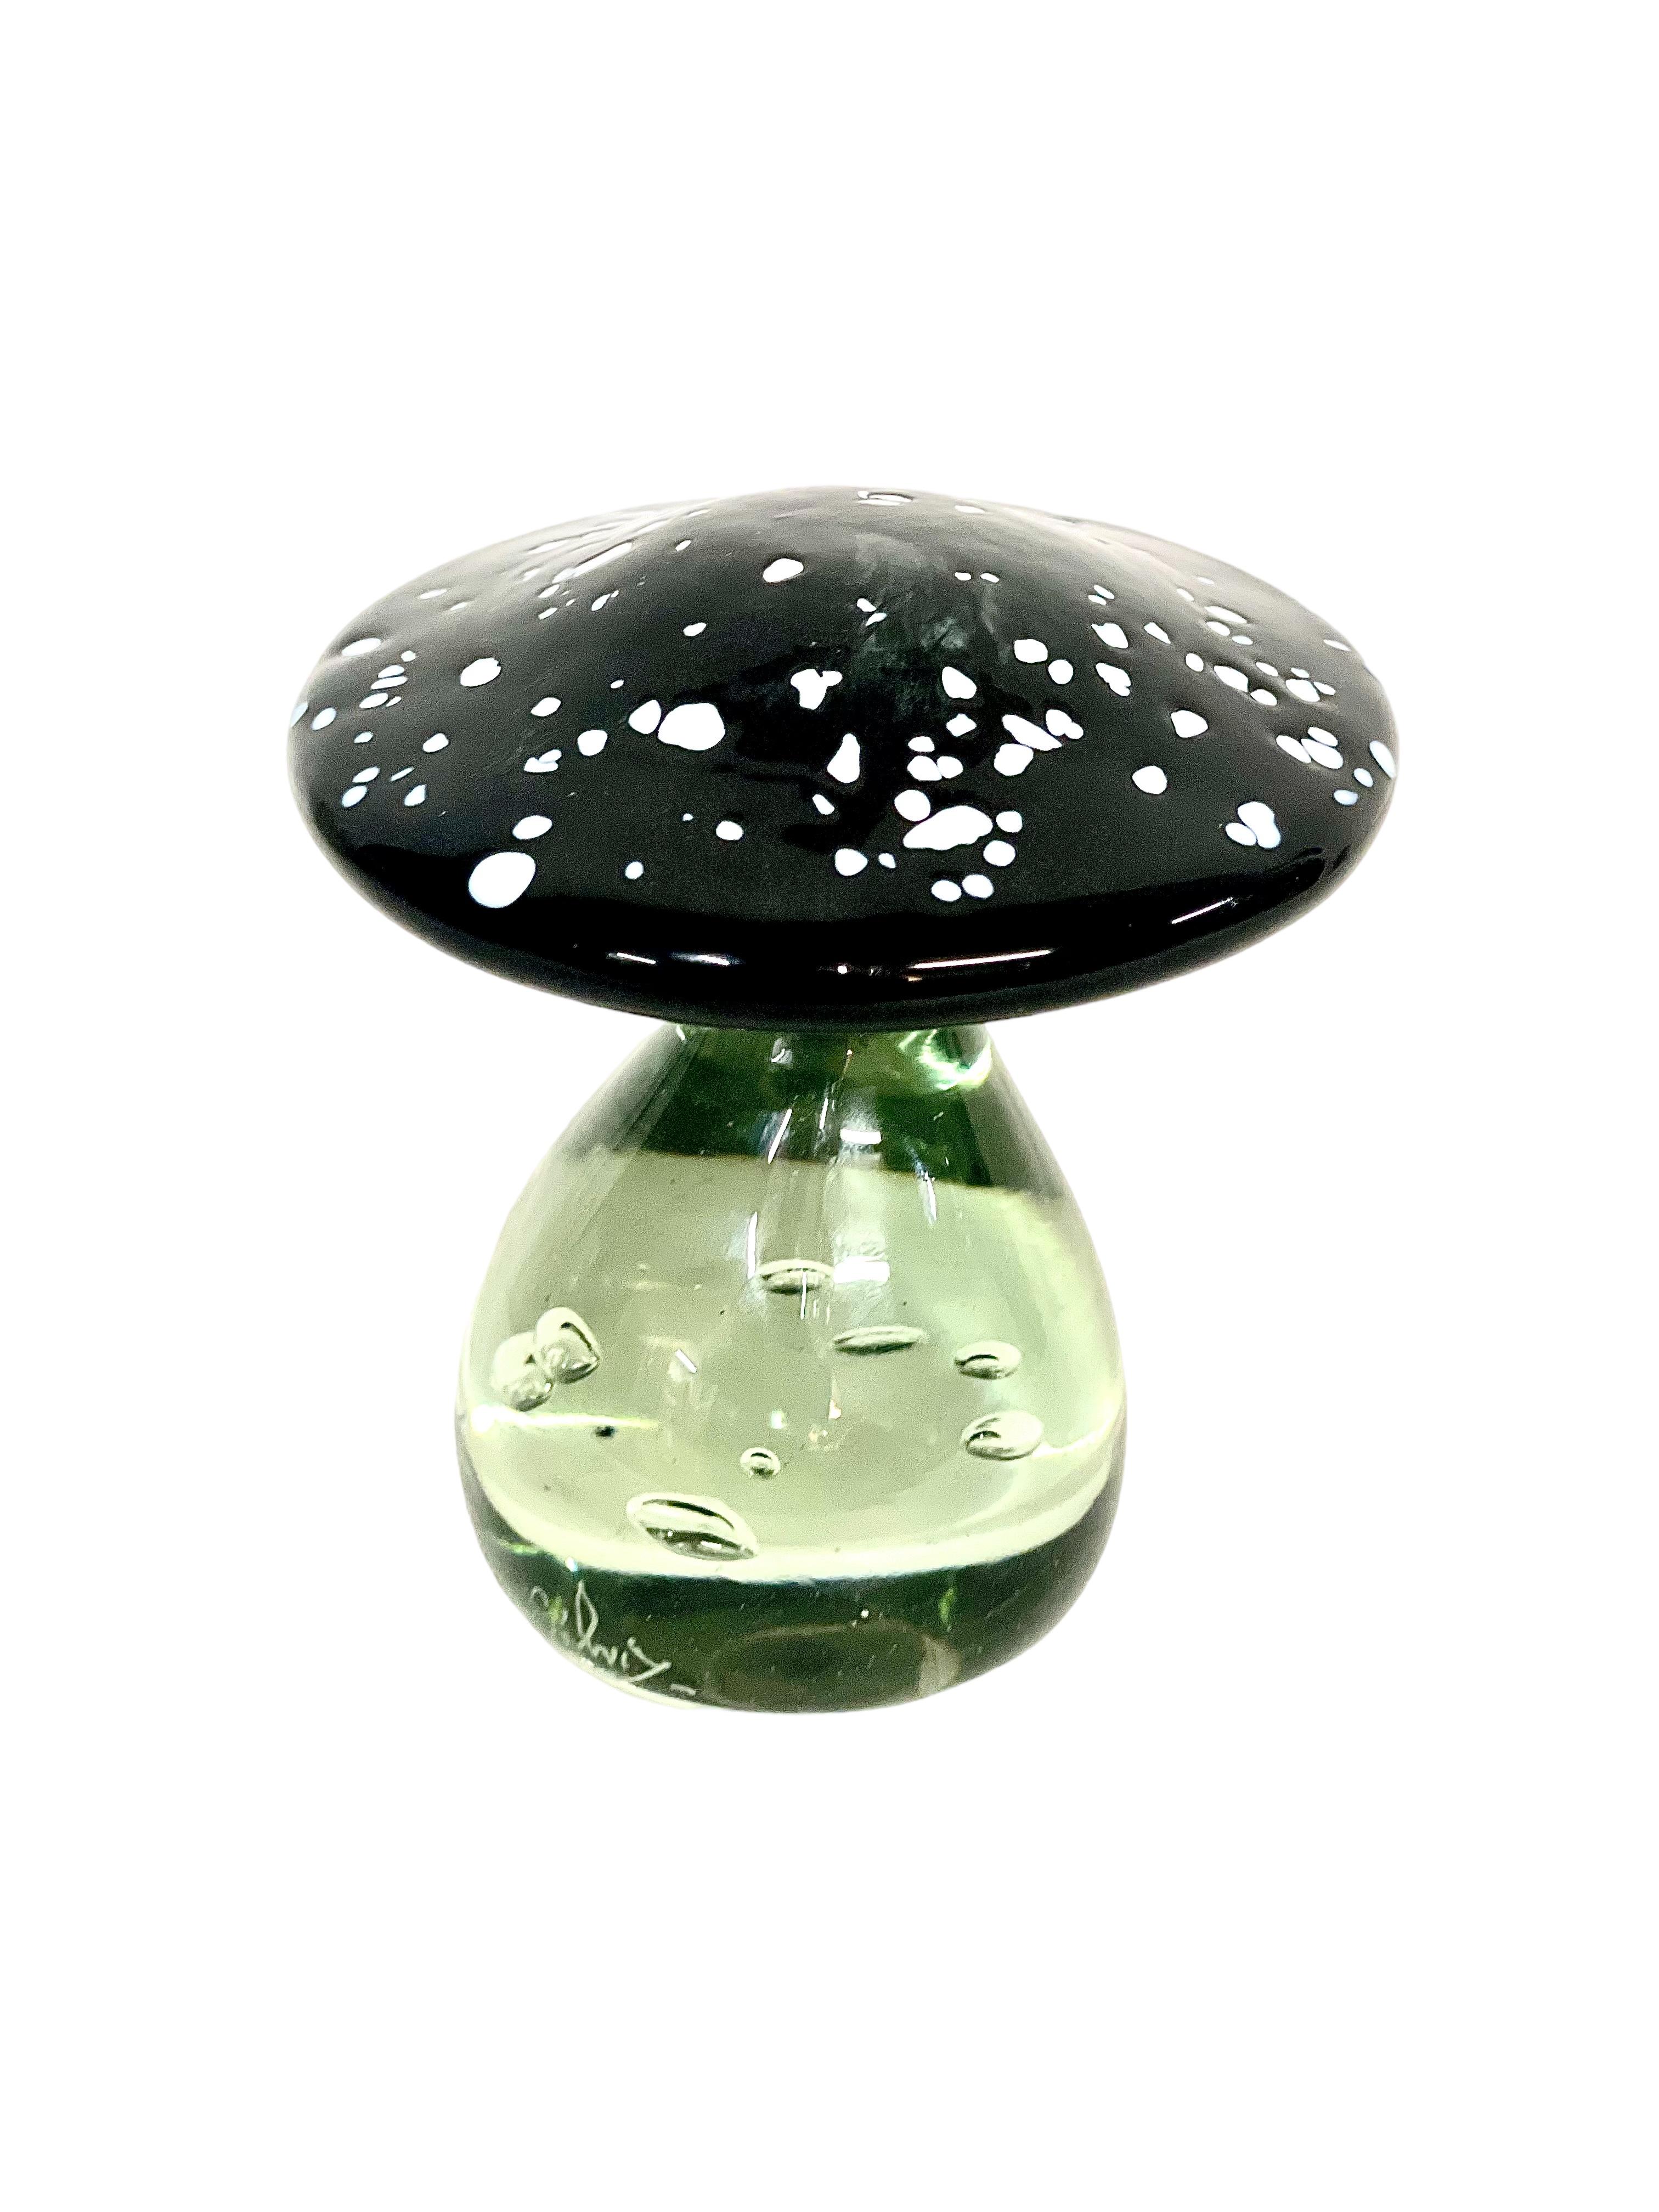 Blown Glass Murano Glass Mushroom Ornament or Paperweight For Sale